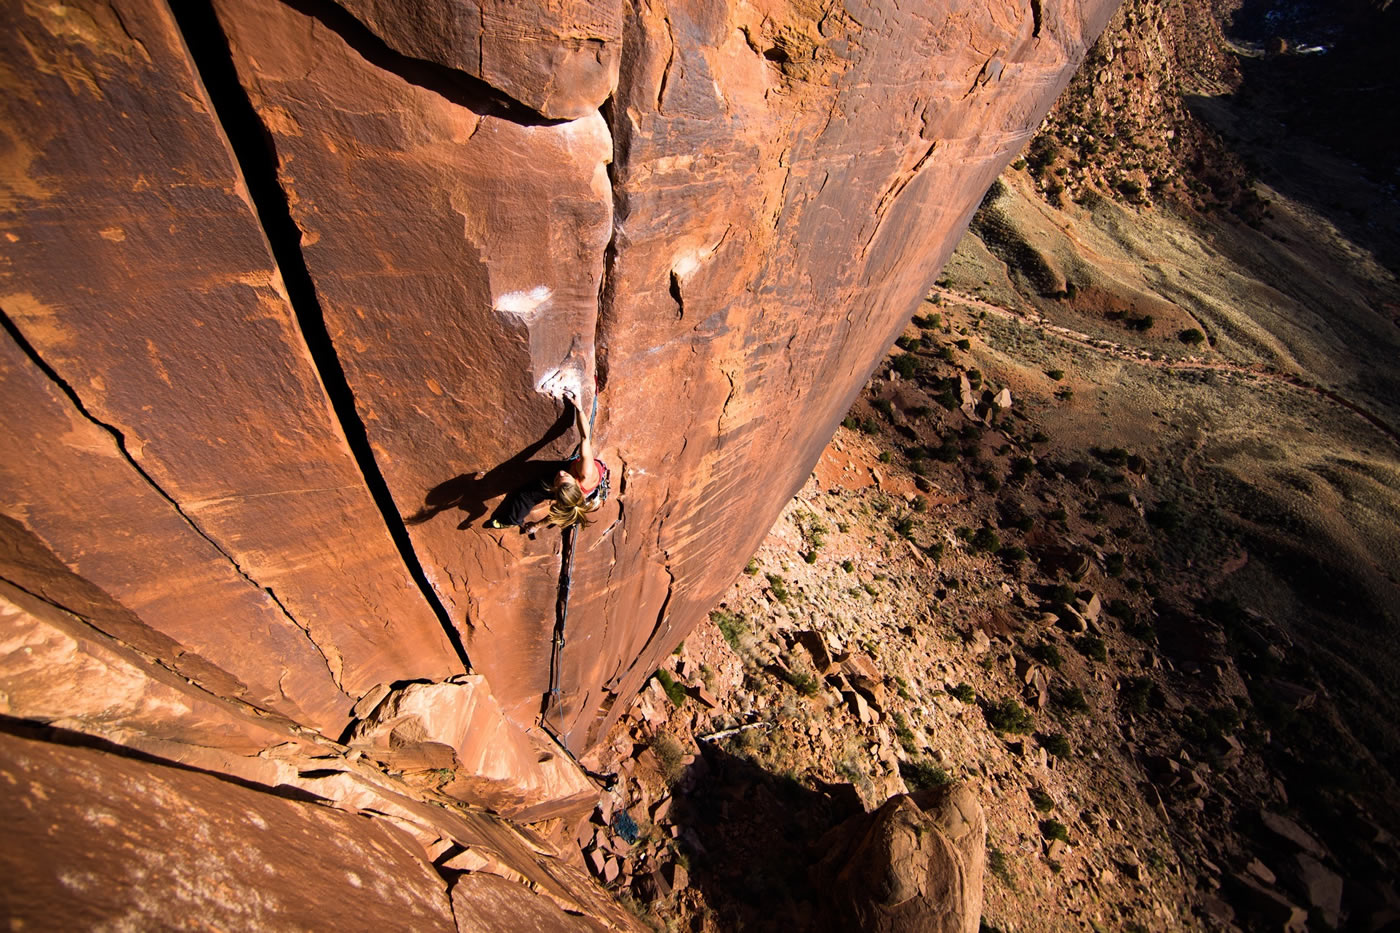 With his camera on his back, Forest led up Wavy Gravy (5.10) to get this shot of me on Mantel Illness (5.11). I knew he'd capture a stunning image, but I didn't know that the sun would be so perfectly poised to capture my shadow climbing as well. [Photo] Forest Woodward